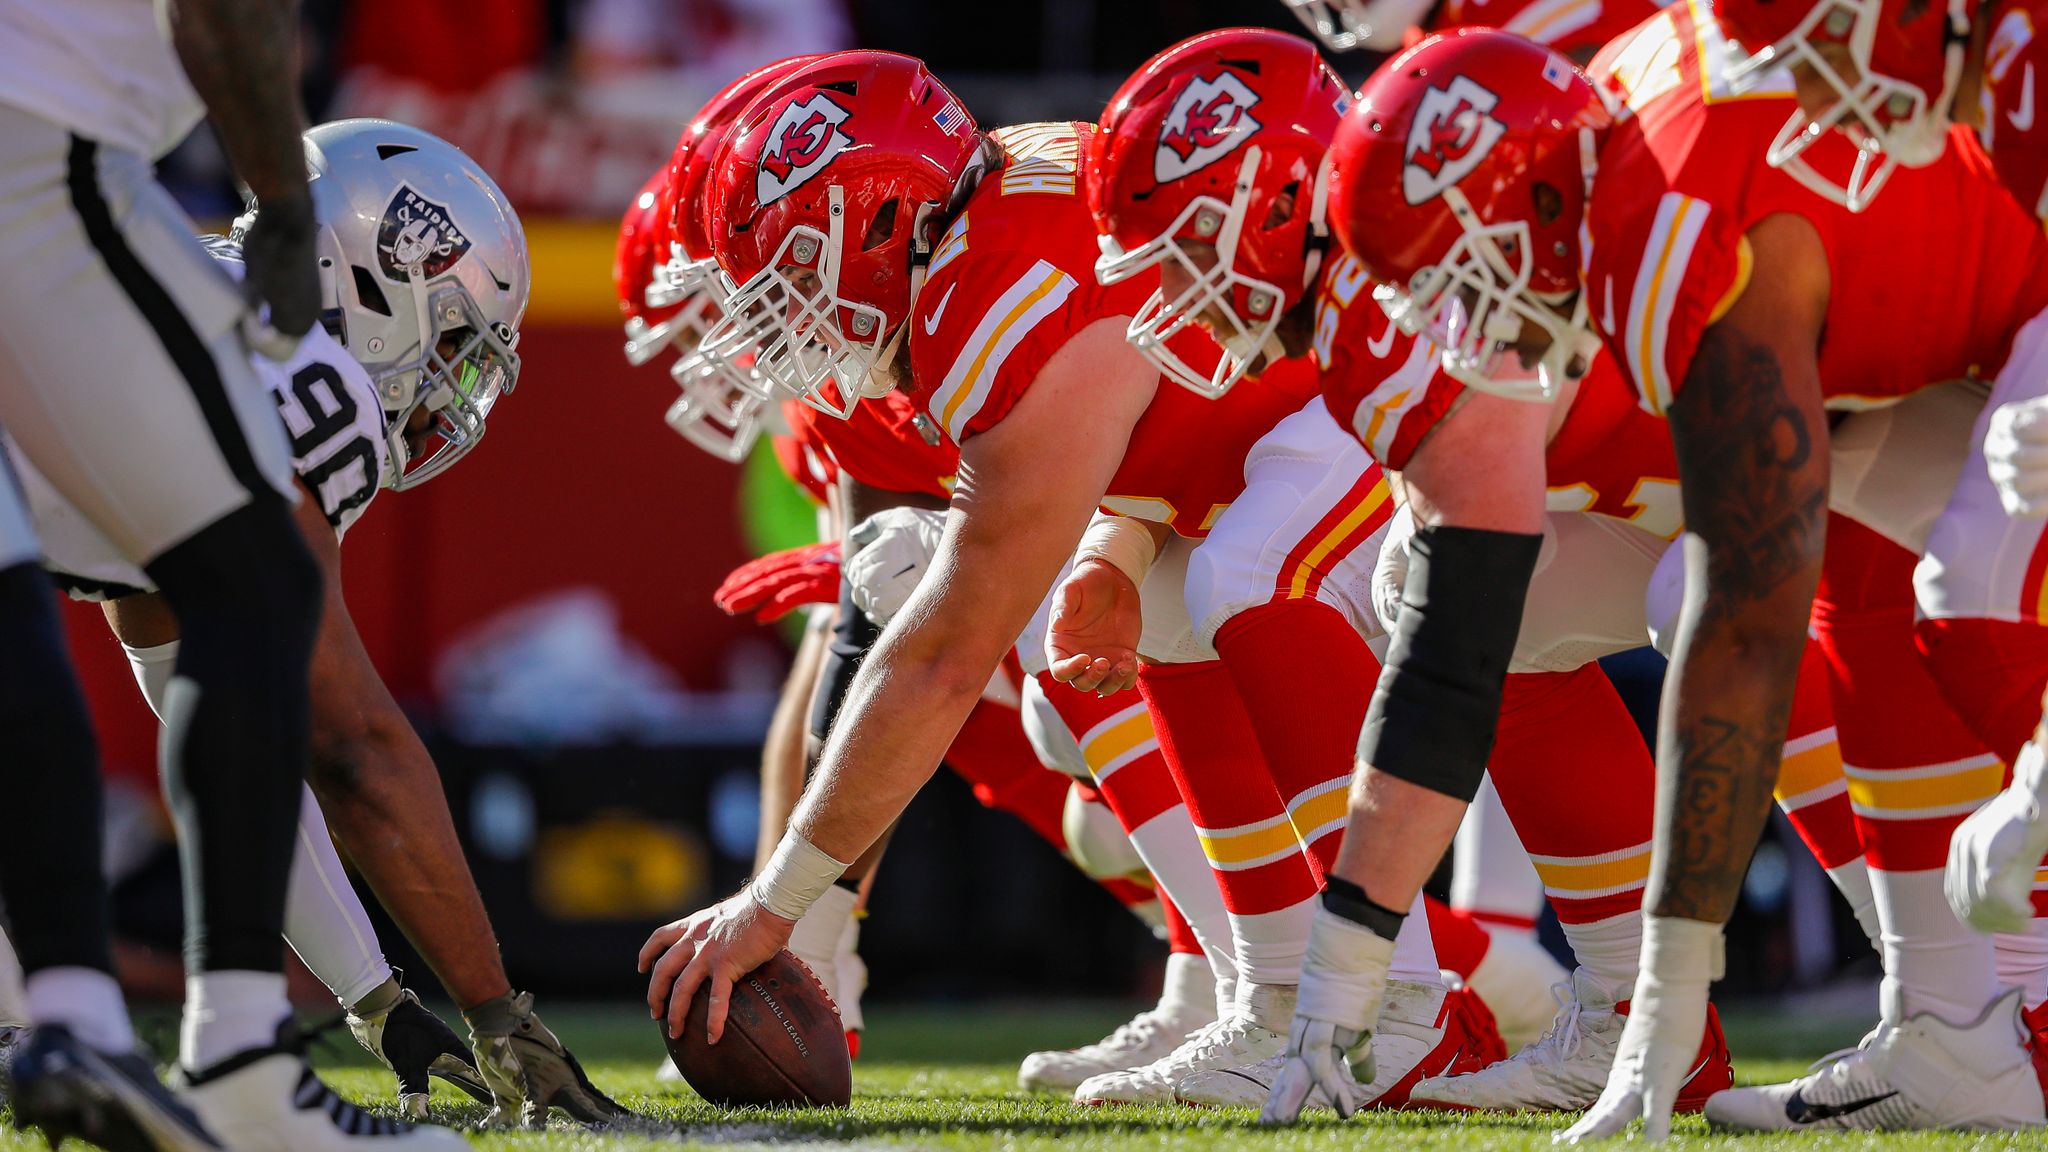 Will the Kansas City Chiefs Call a New State Home? Inside the Battle Over Their Future Stadium